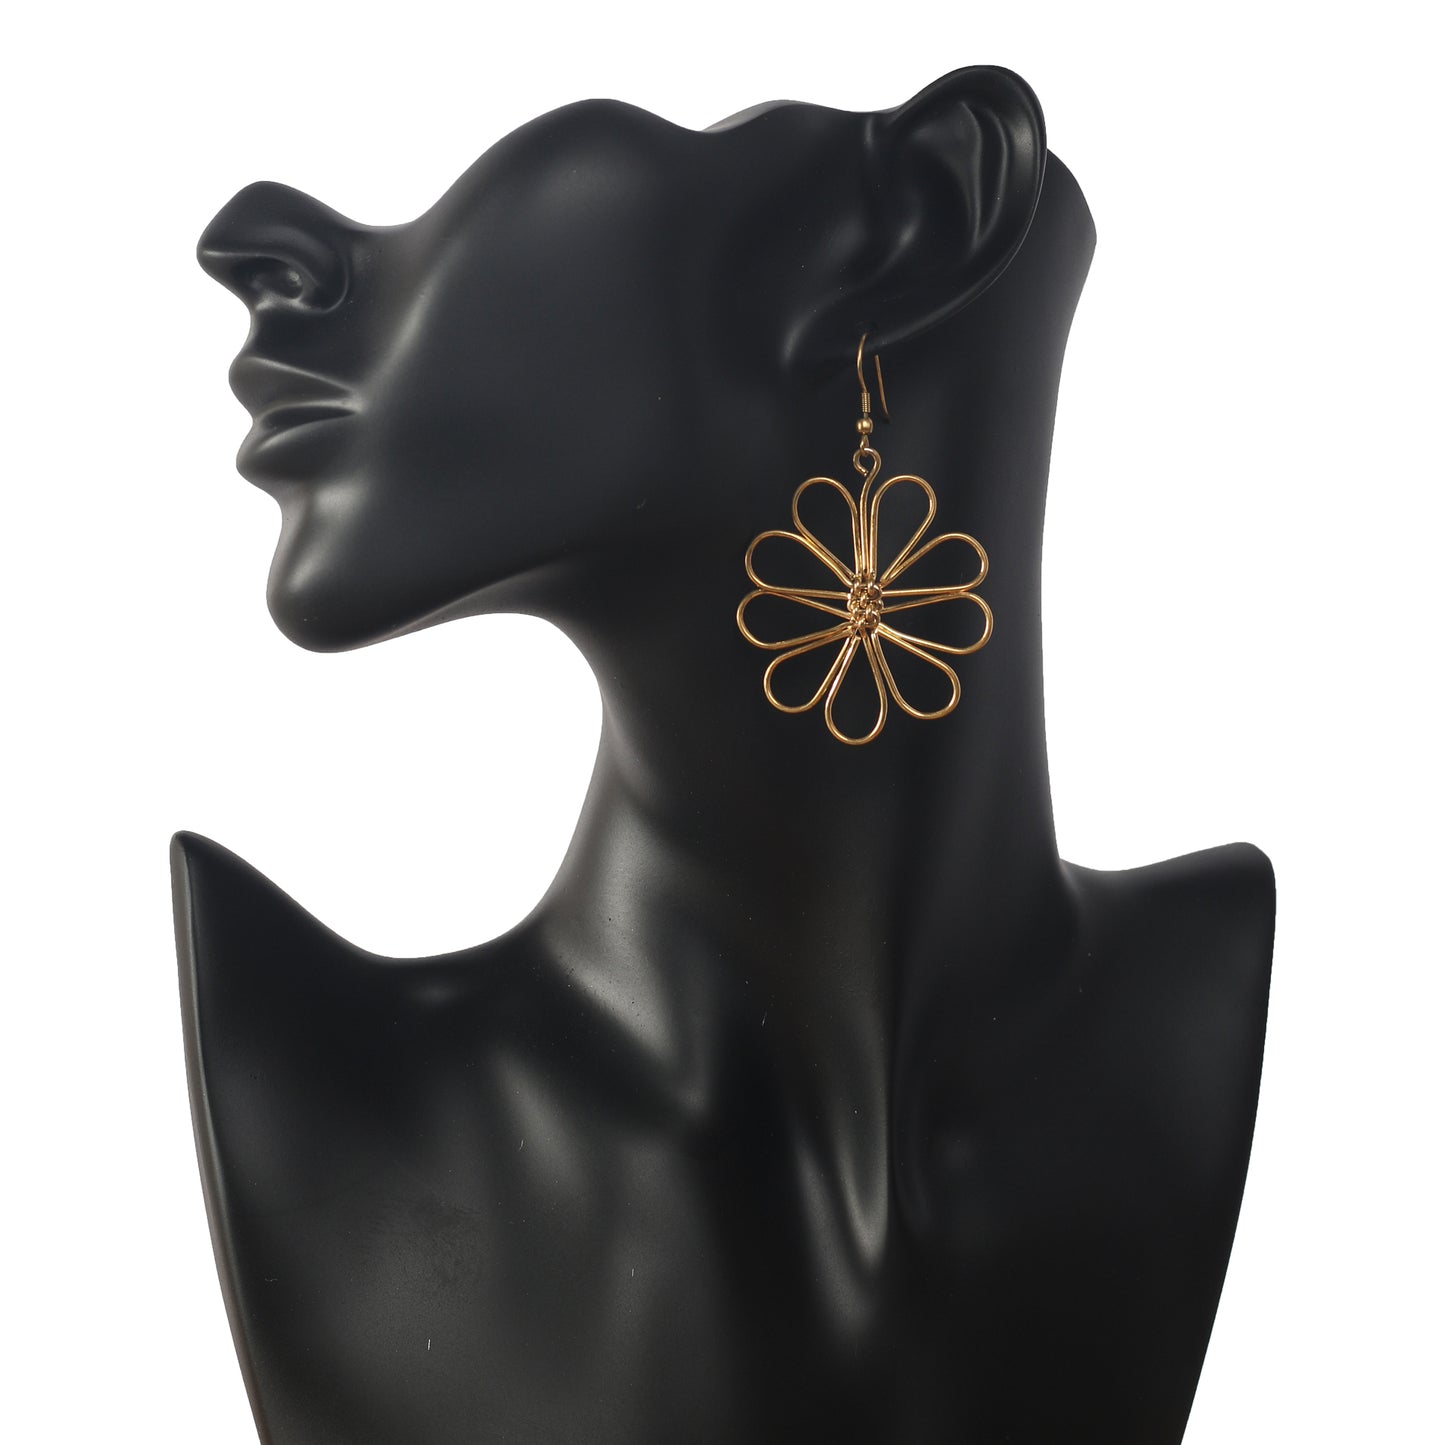 Small Gold Plated Earrings with an abstract flower design